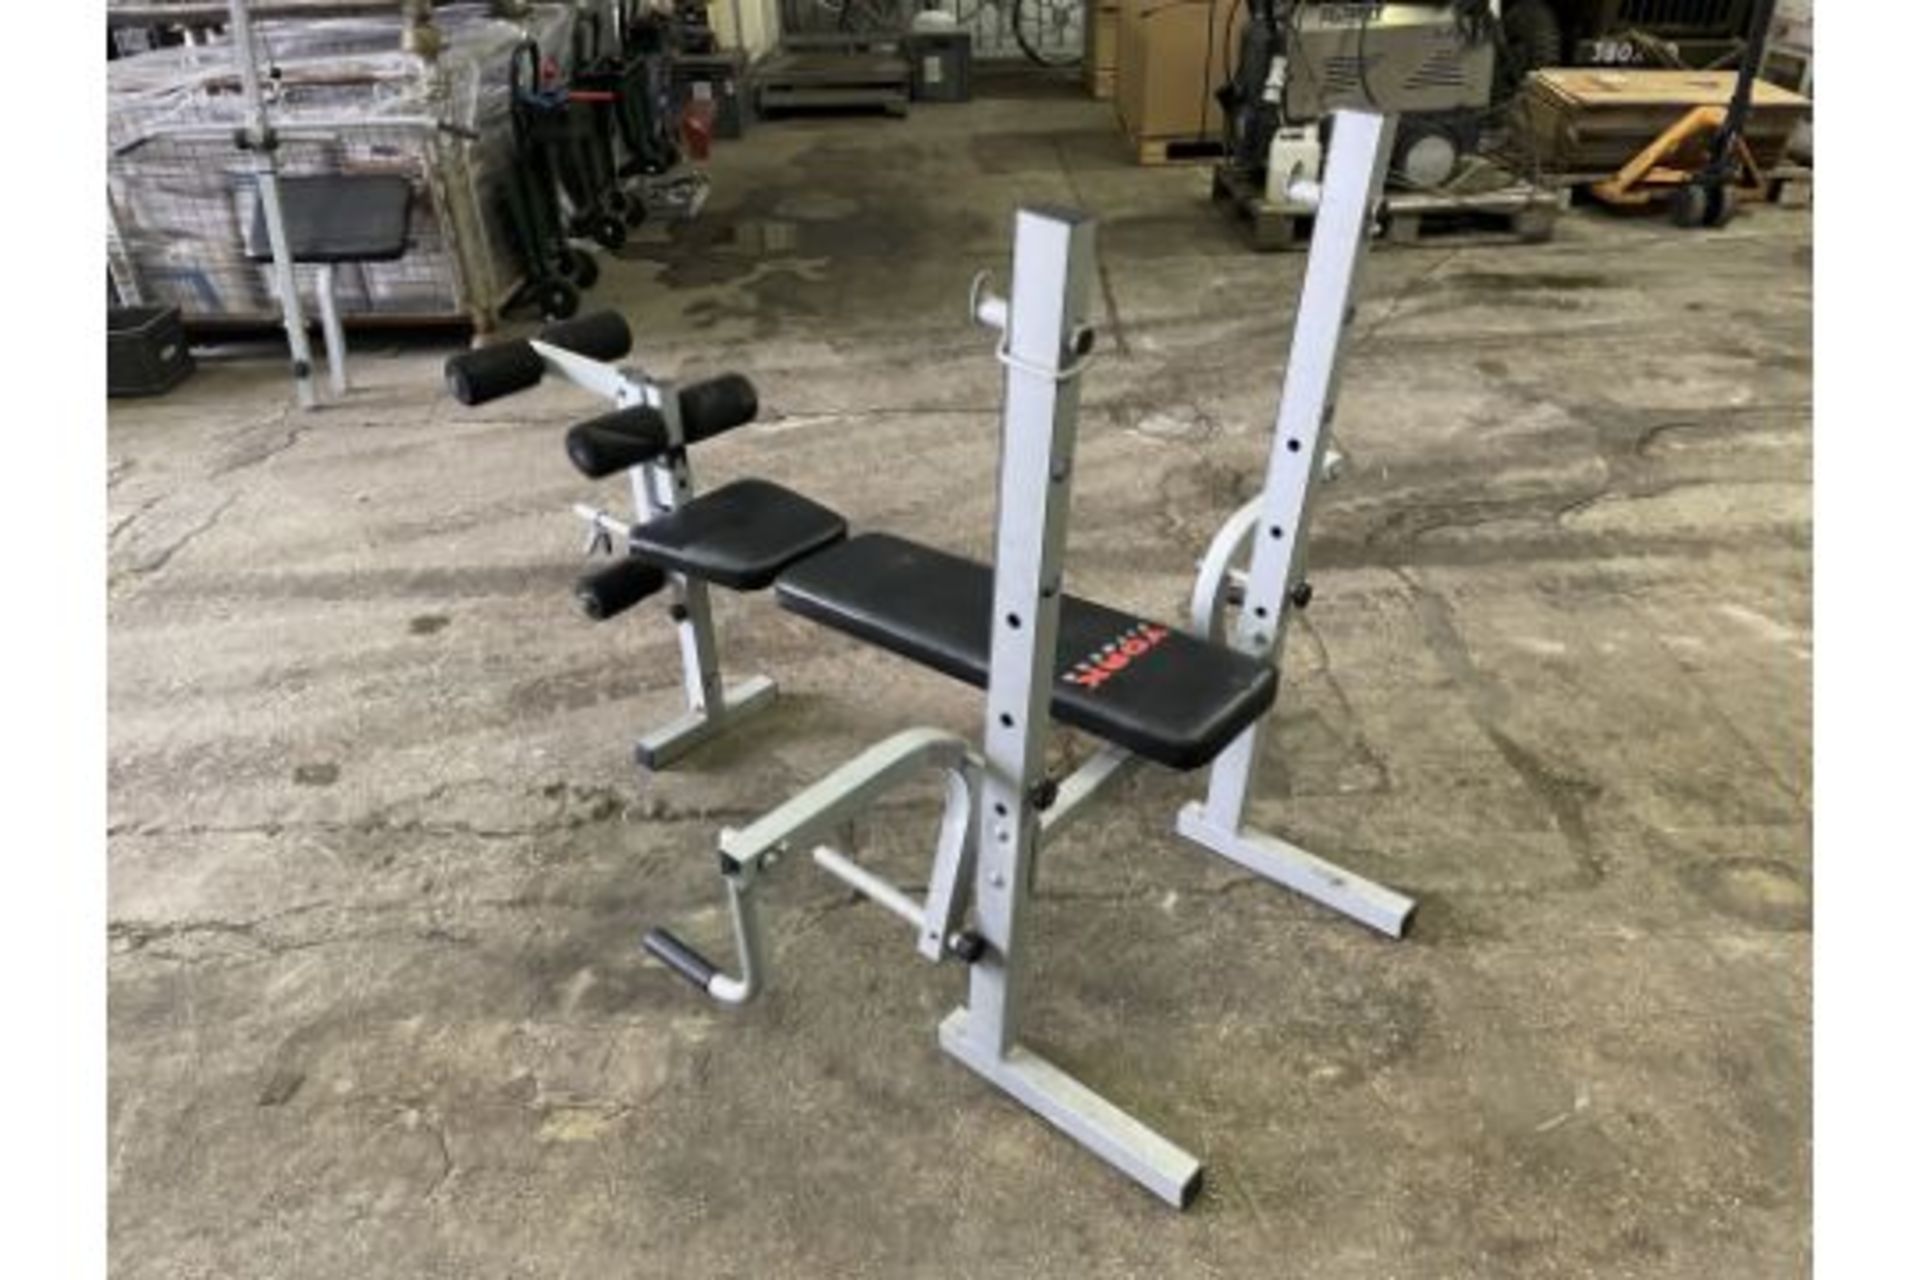 York Fitness Heavy Duty Multi-function Barbell Bench - Image 3 of 12